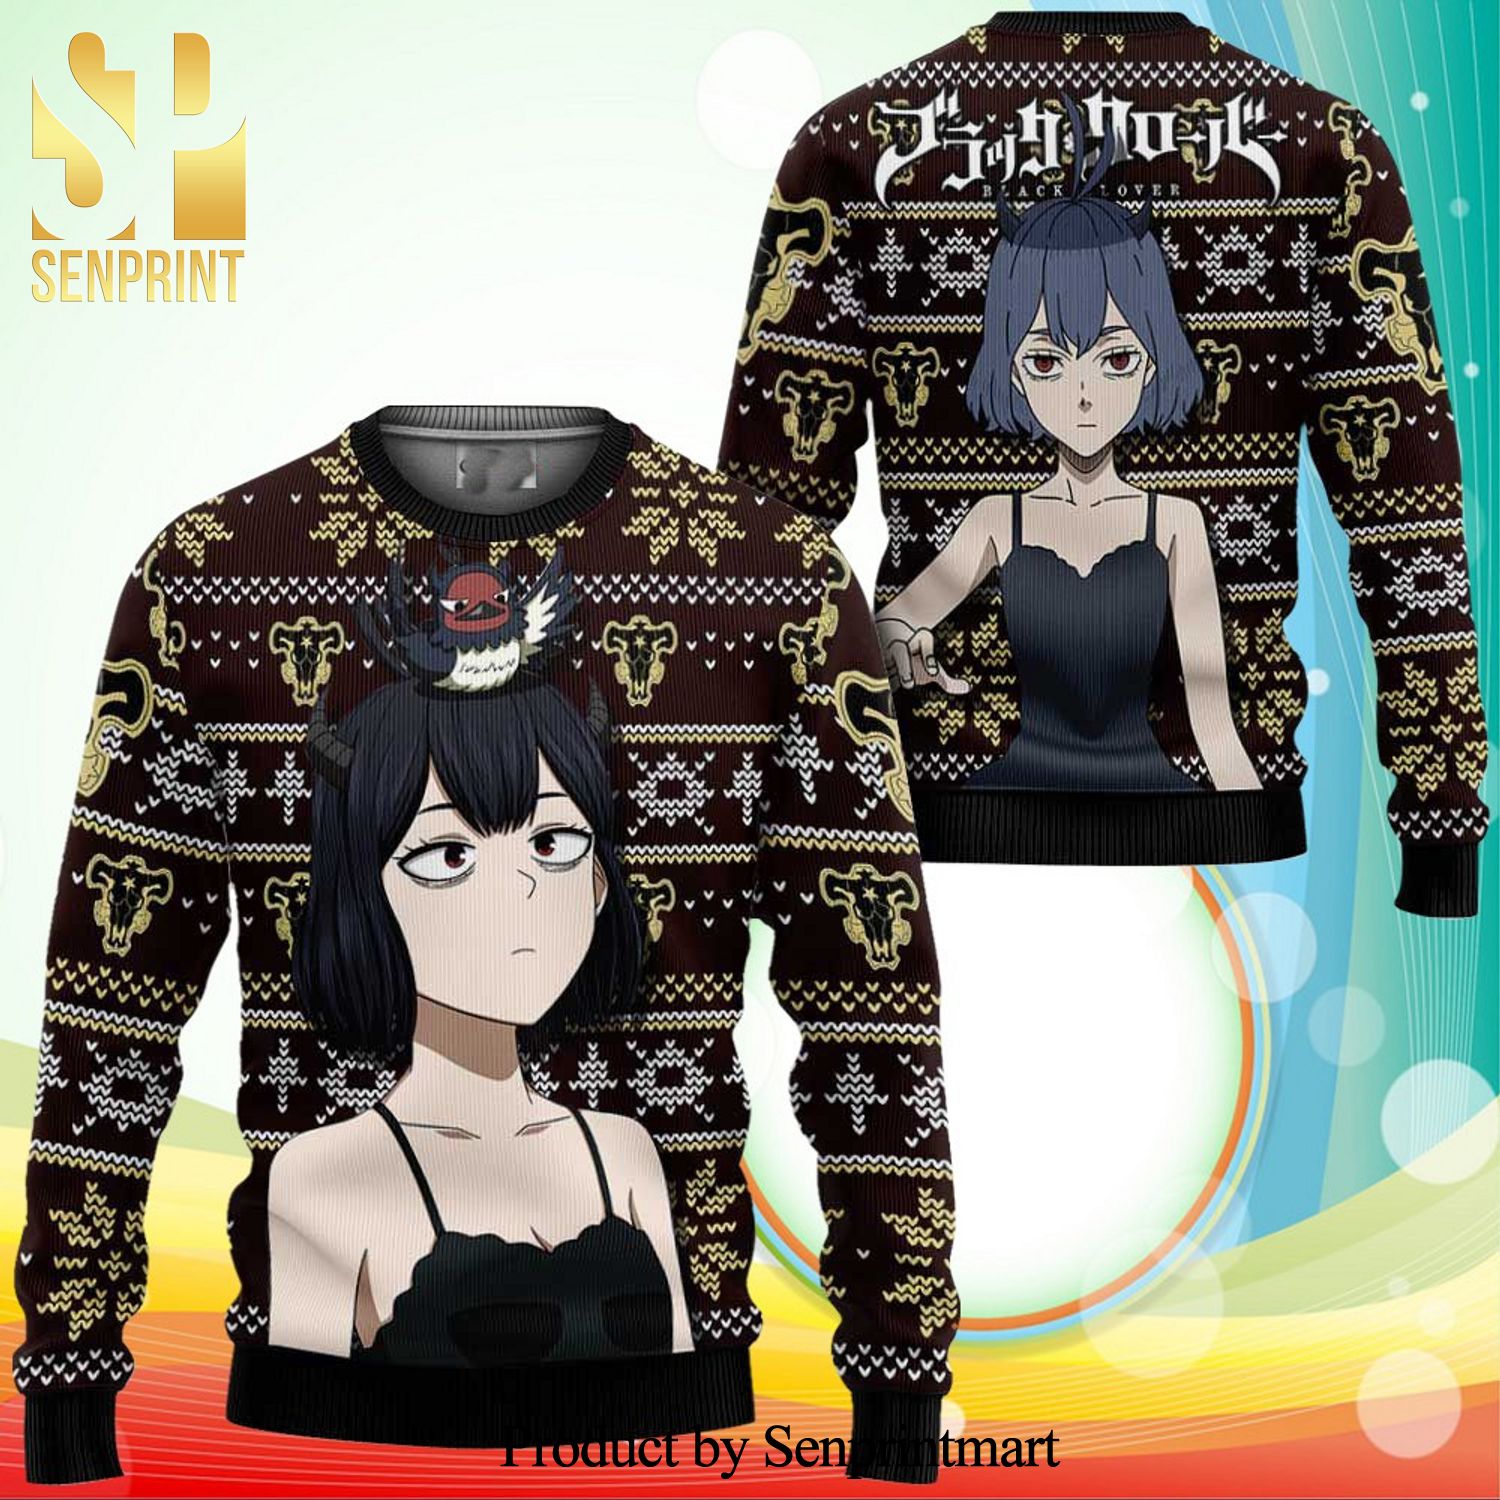 Swallowtail Secre Black Clover Anime Xmas Gifts Knitted Ugly Christmas Sweater